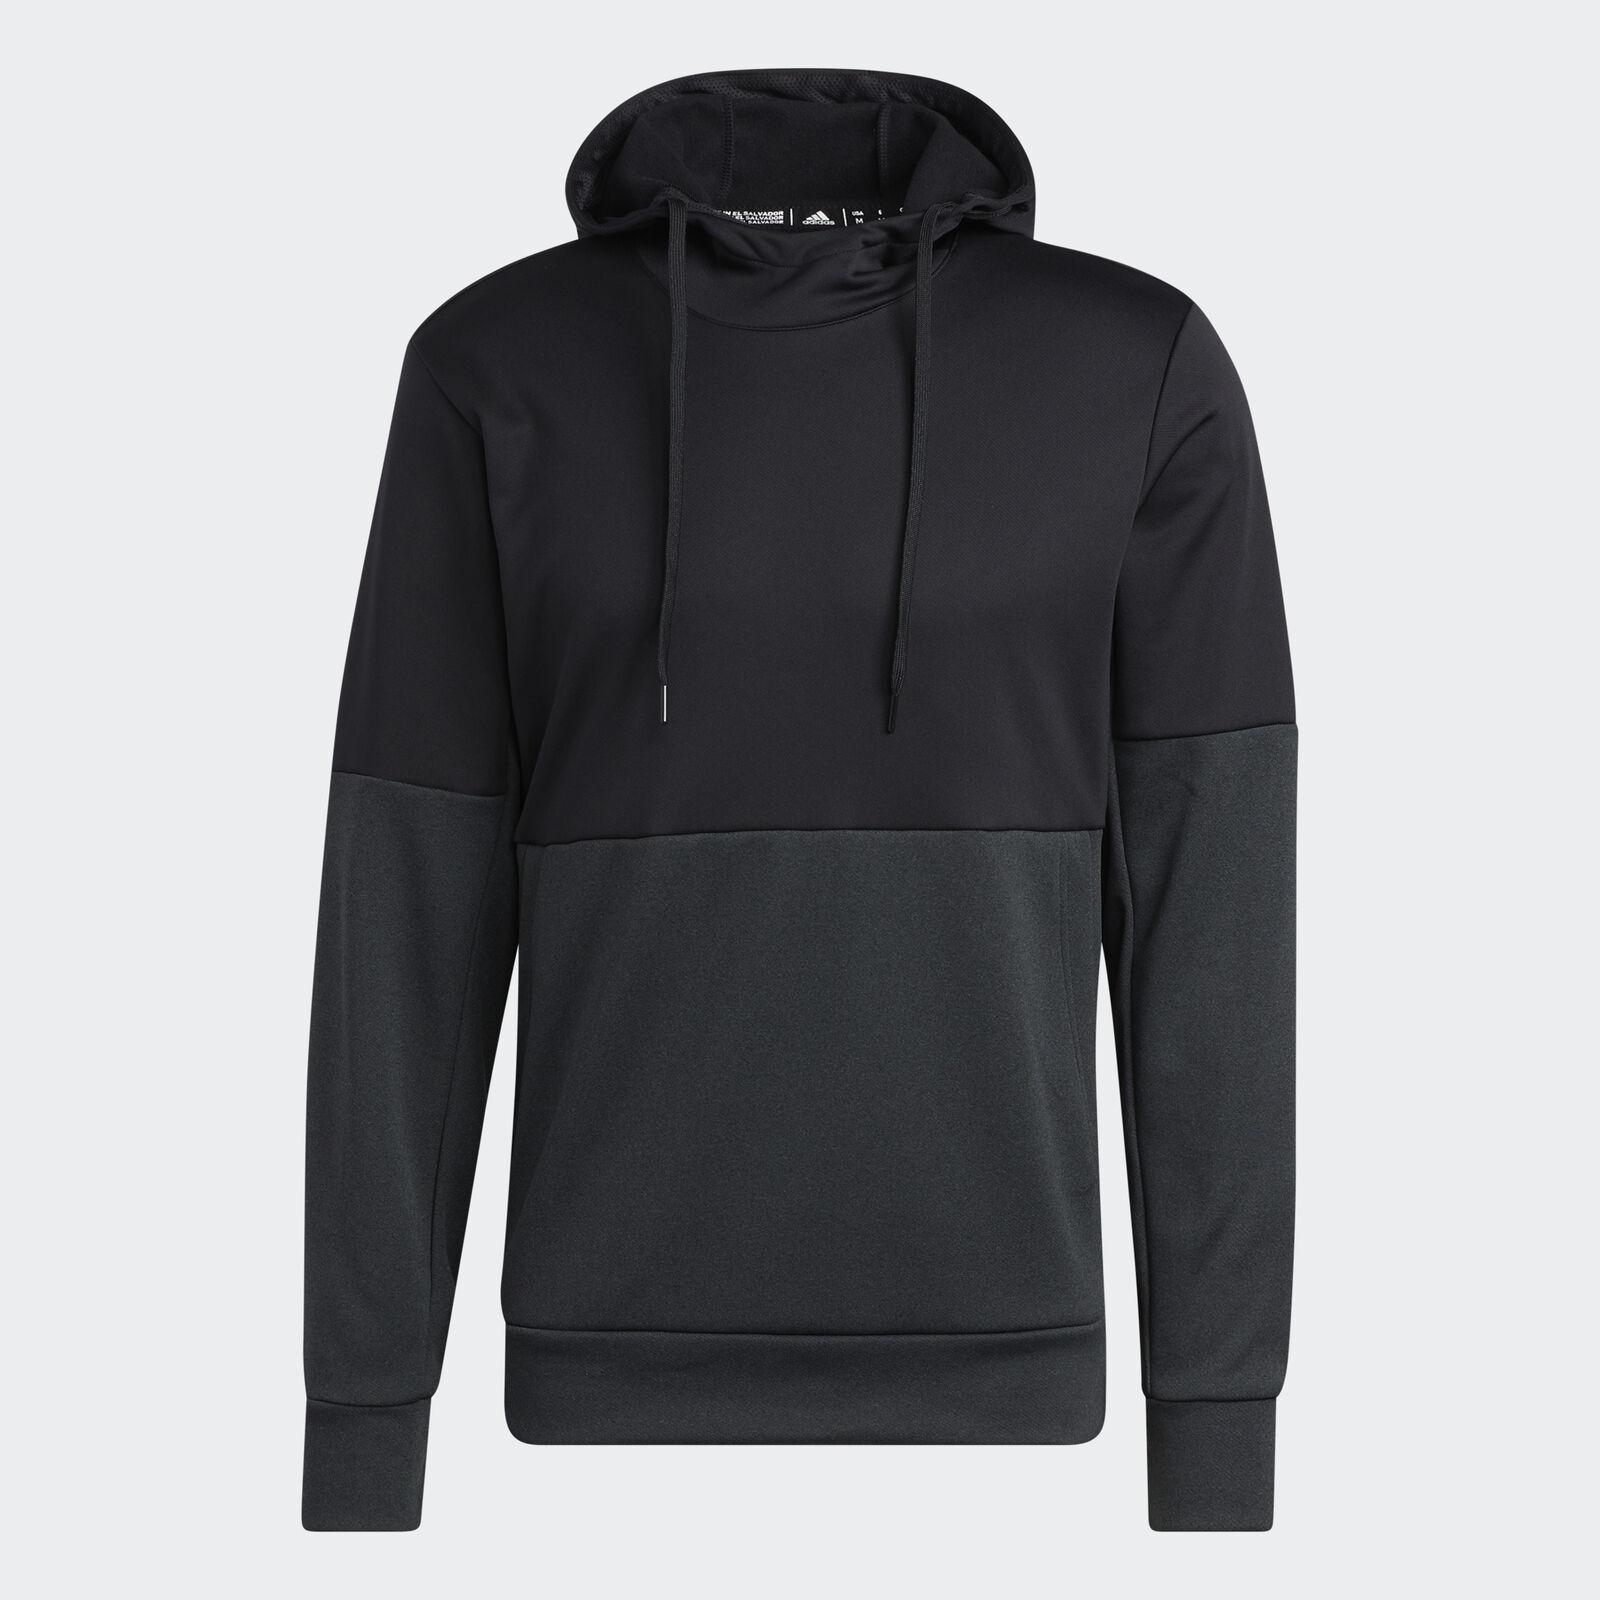 Adidas Team Issue Pullover Hoodie Sweater for $15.84 Shipped